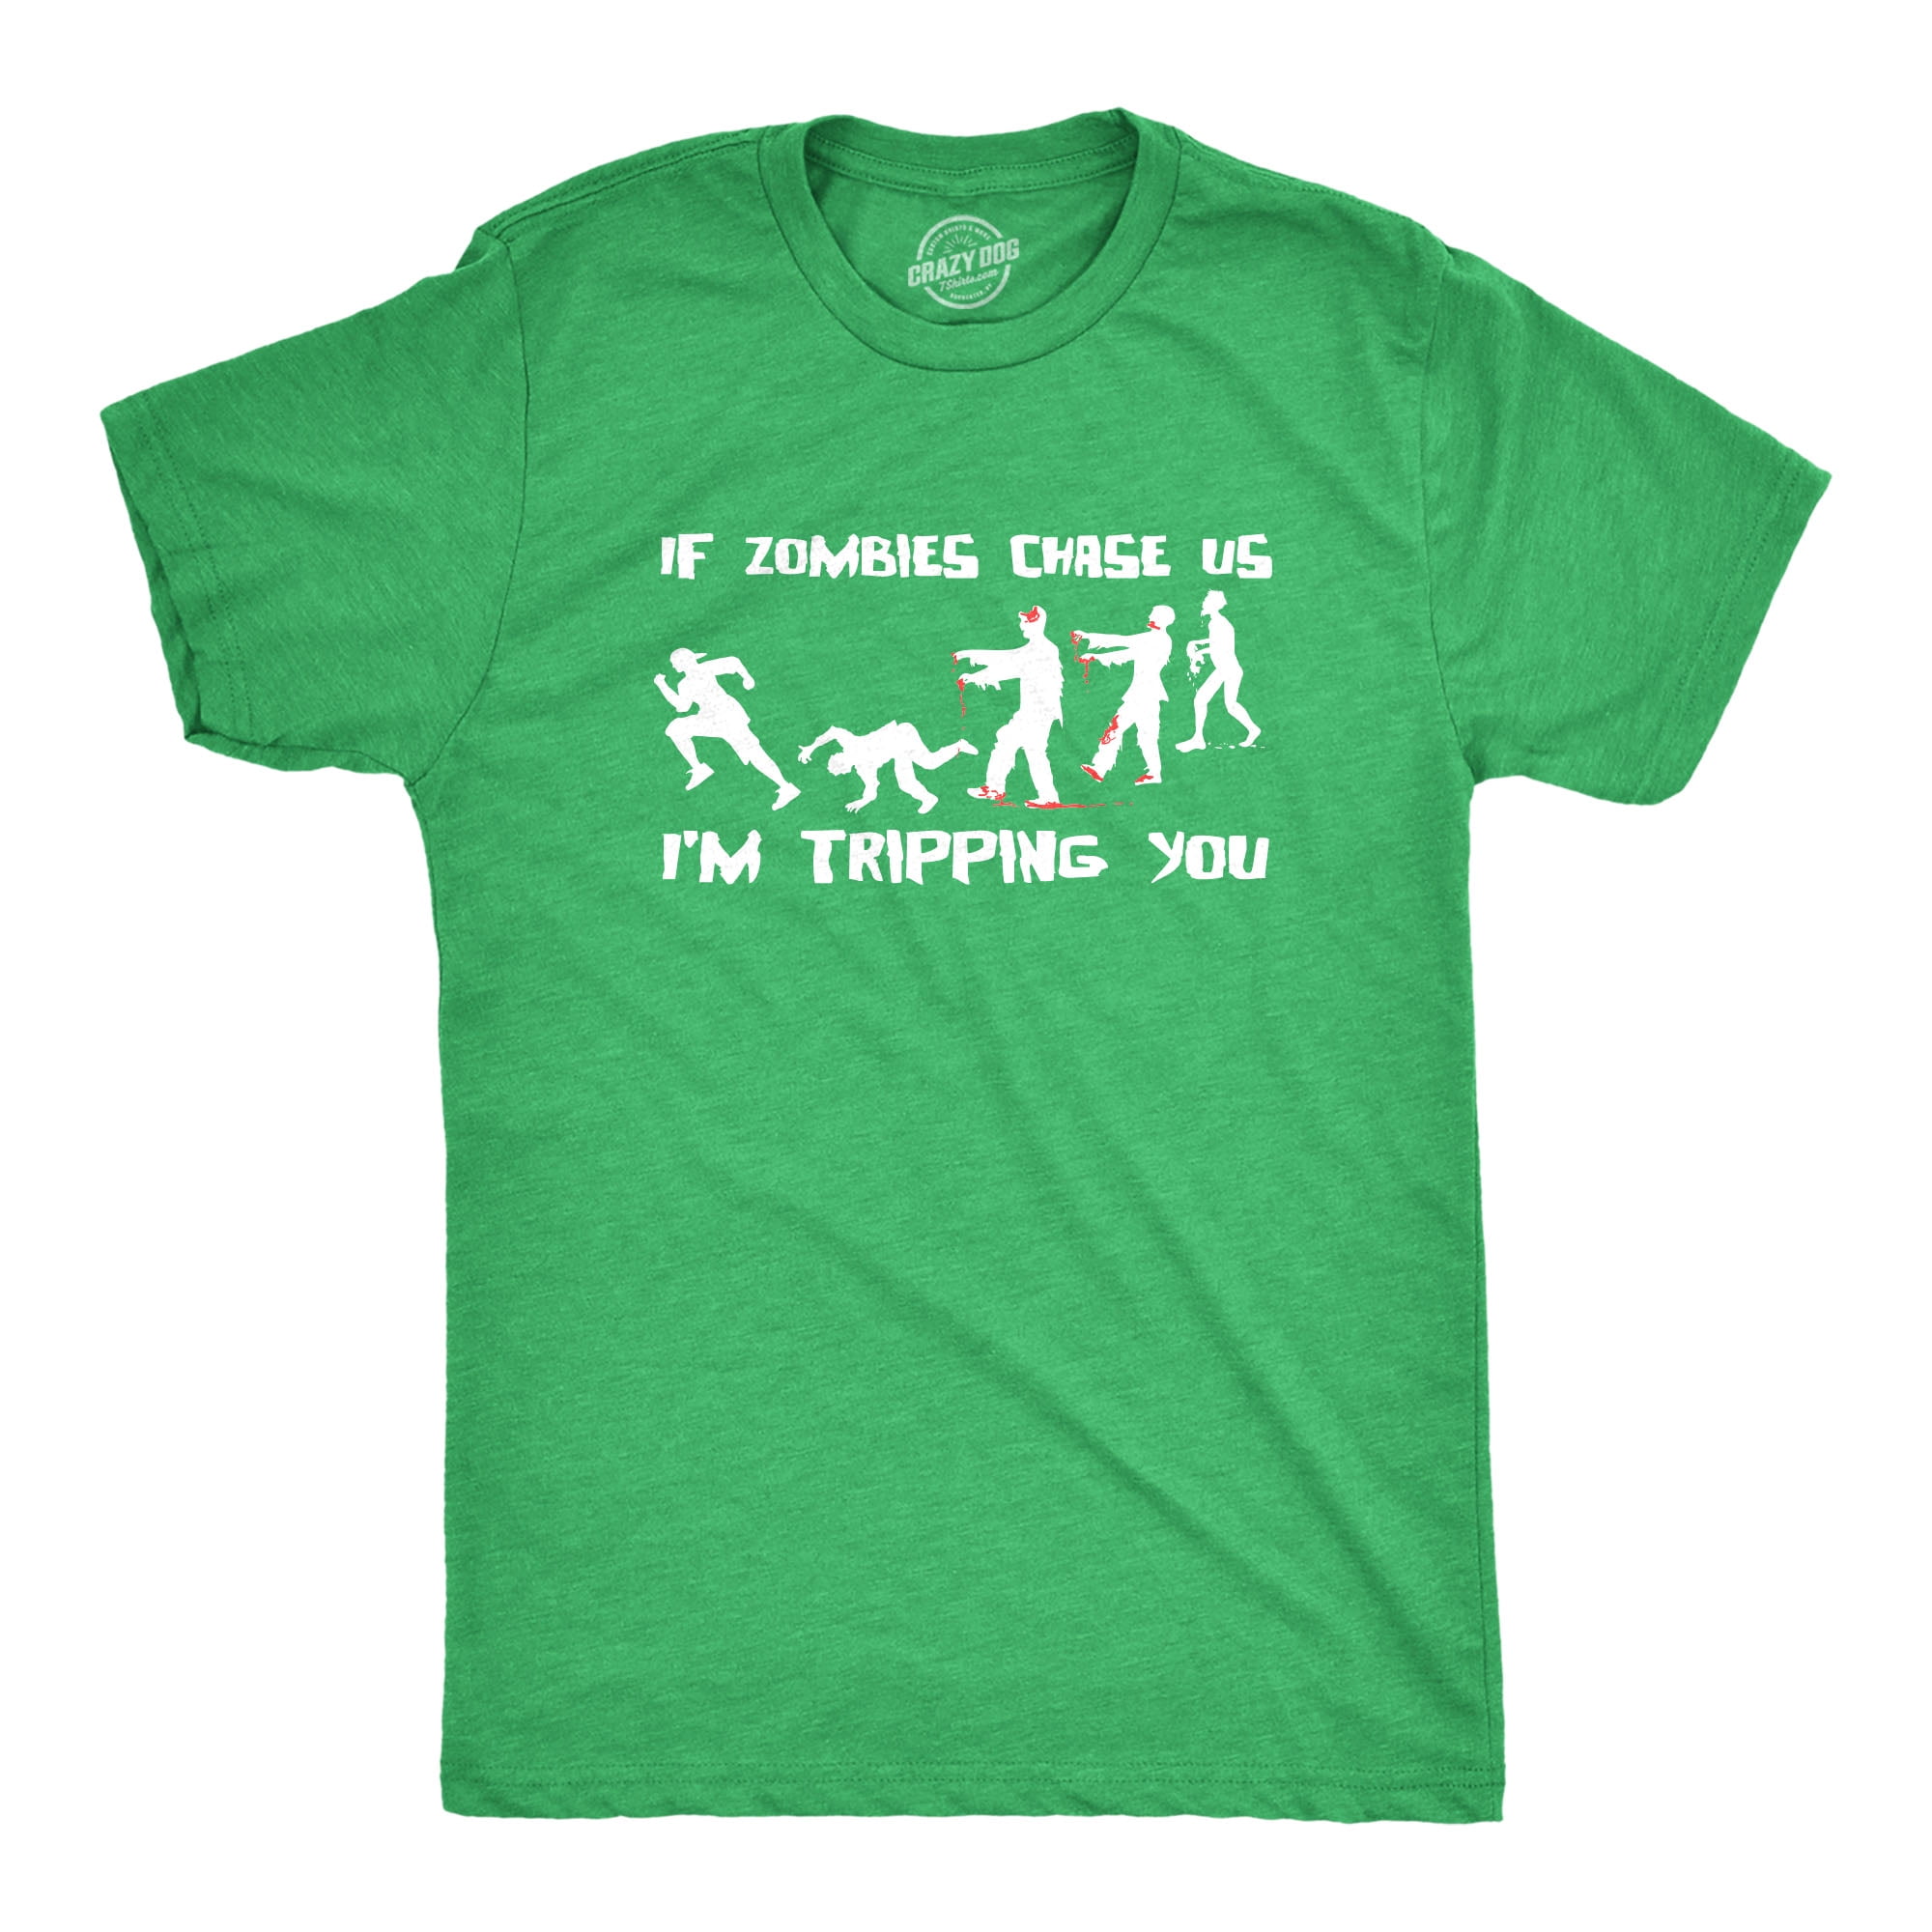 WARNING IF ZOMBIES CHASE US I'M TRIPPING YOU FUNNY Unisex Adult T-Shir...